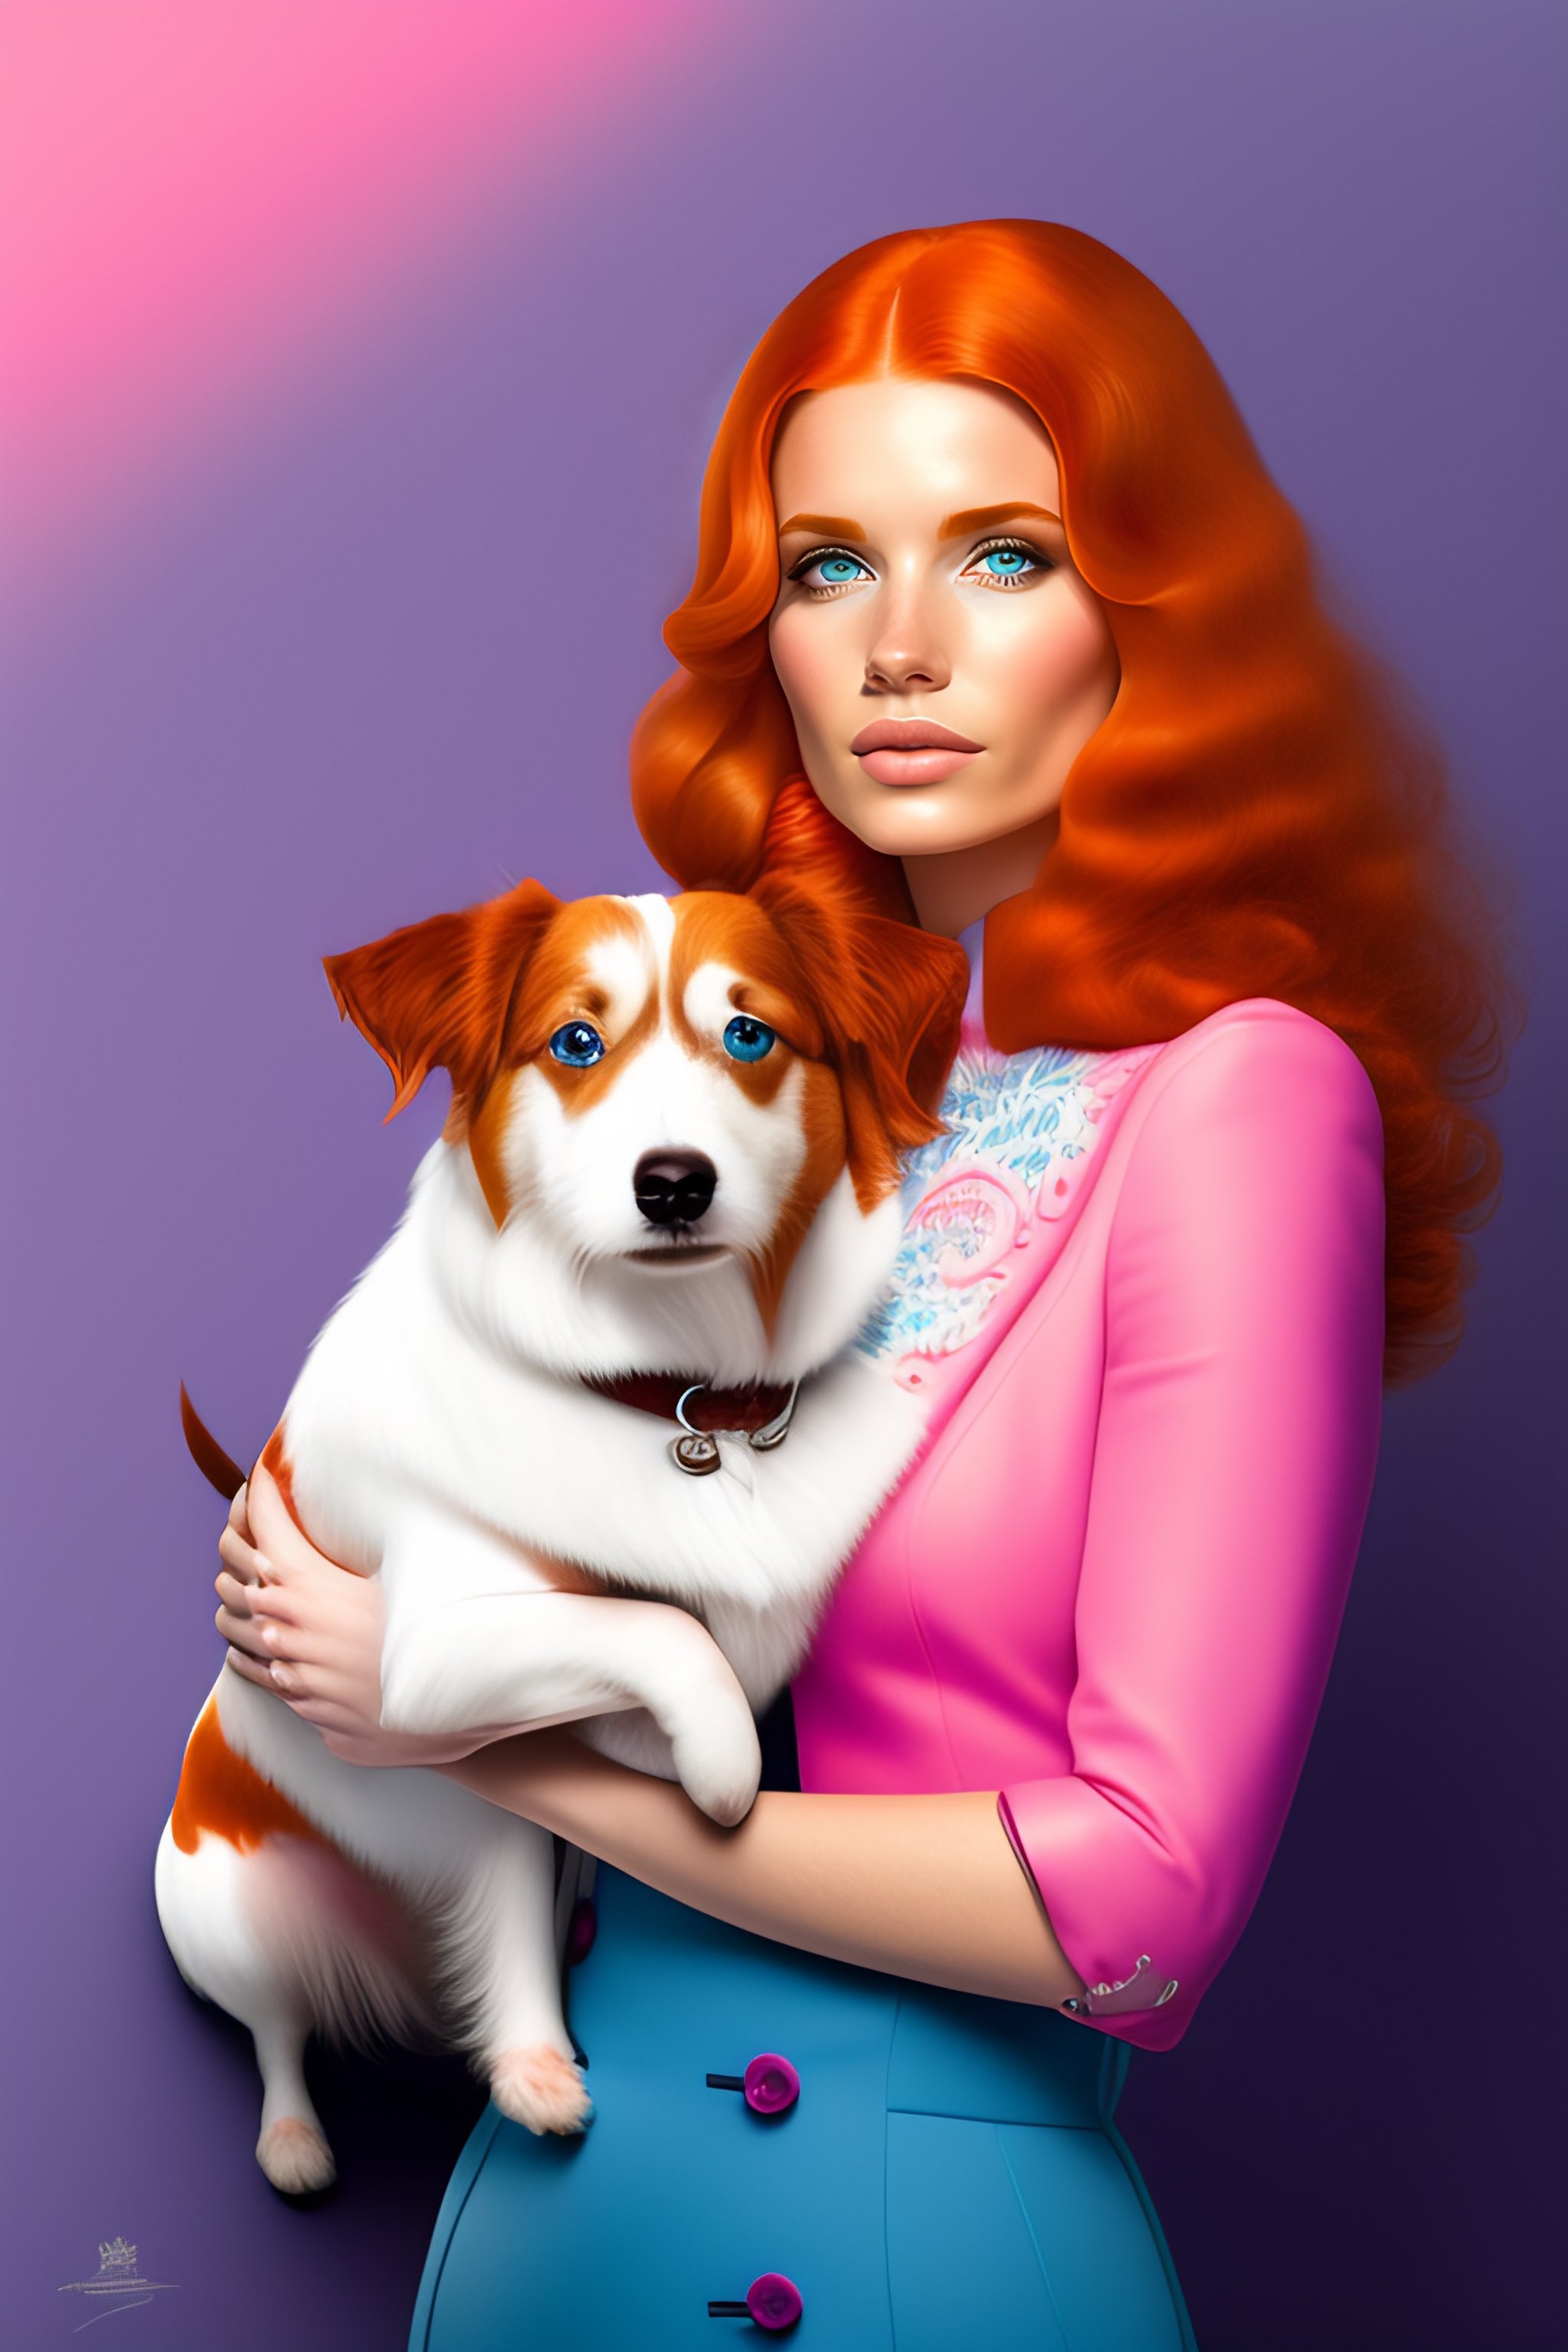 Lexica Cute Blue Eyed Long Haired Redhead Woman And A White Jack Russell Terrier Pink